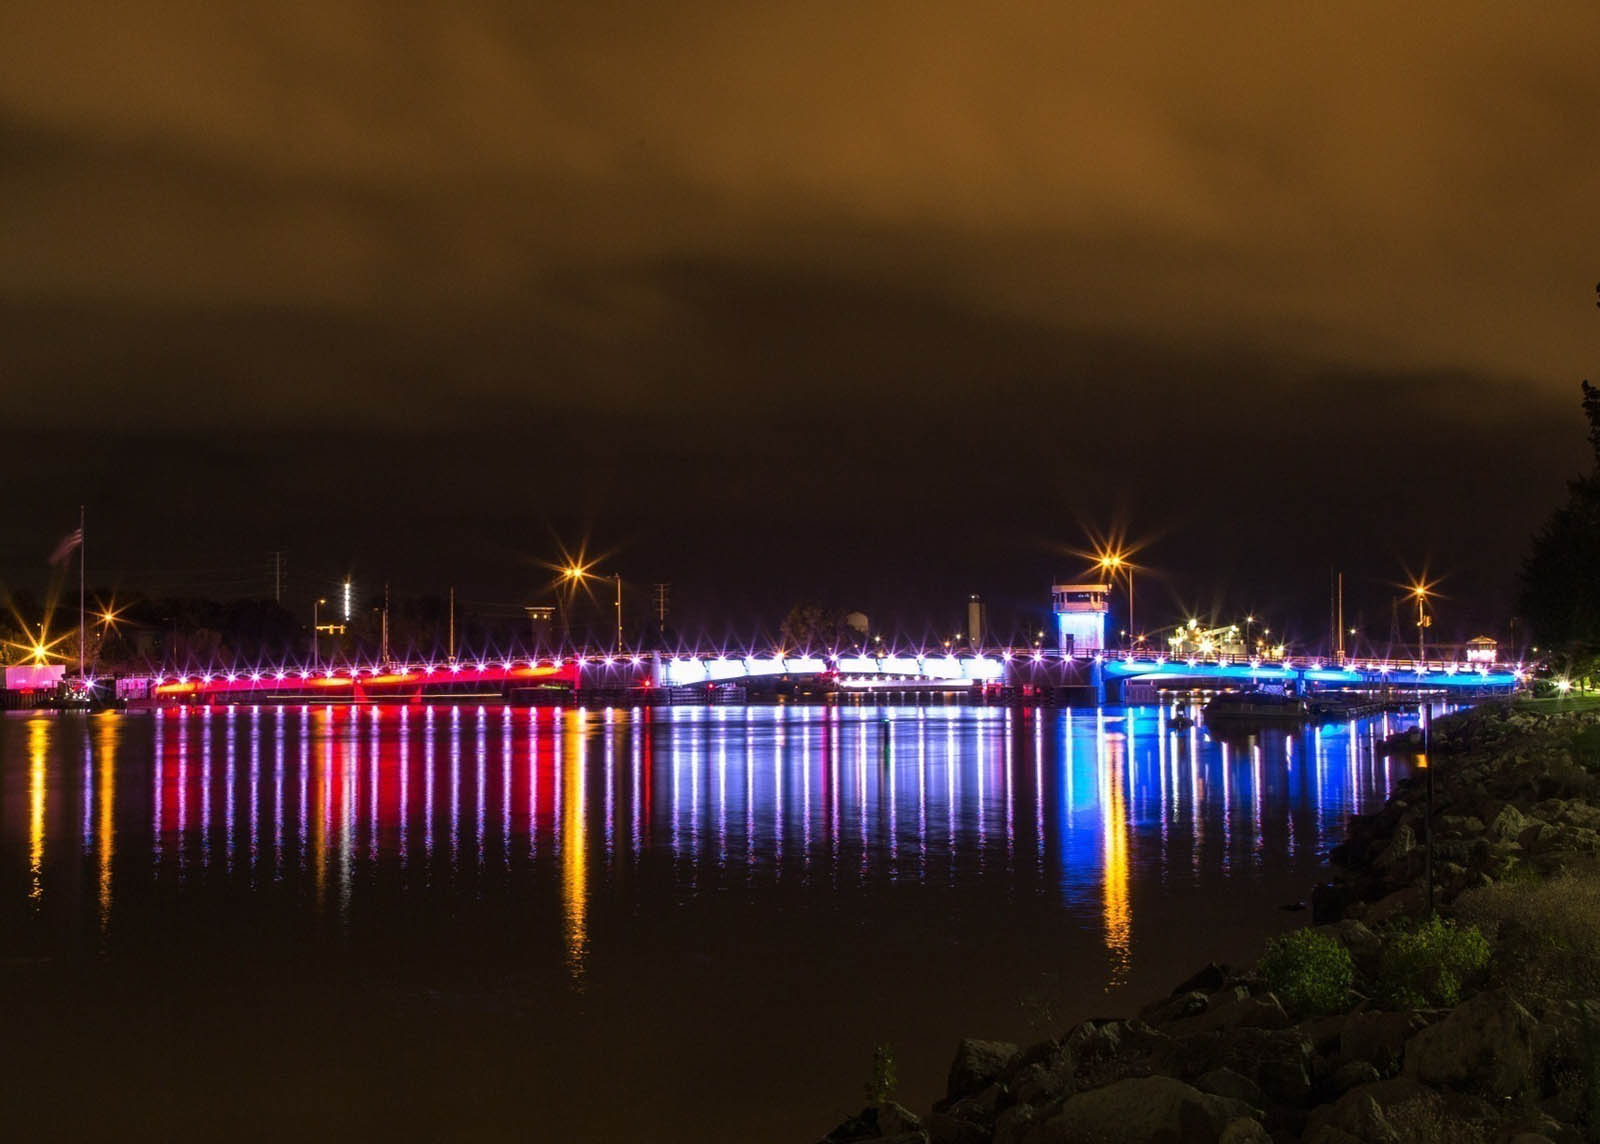 Red, white, and blue LED lighting patterns on the Walnut Street bridge in Green Bay, WI